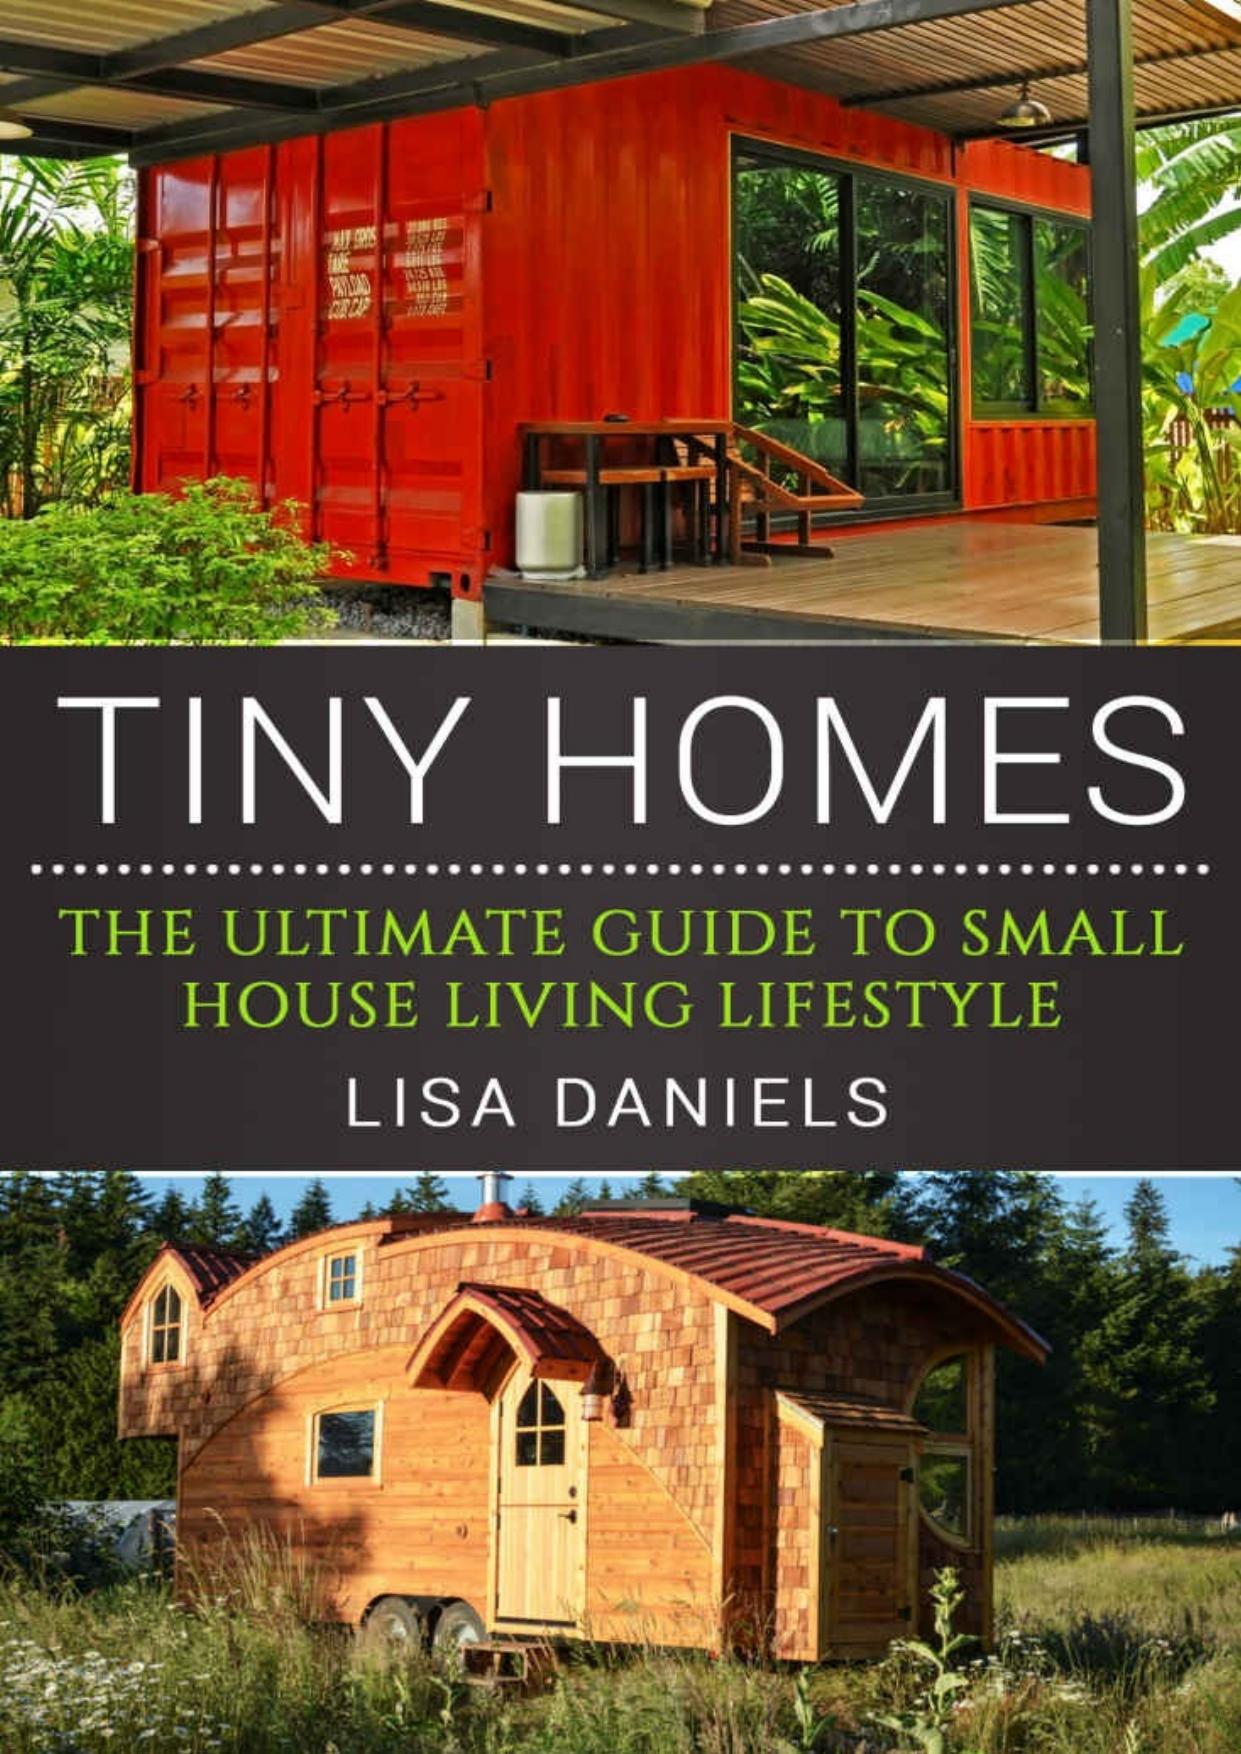 Tiny Homes: The Ultimate Guide To Small House Living Lifestyle by Daniels Lisa